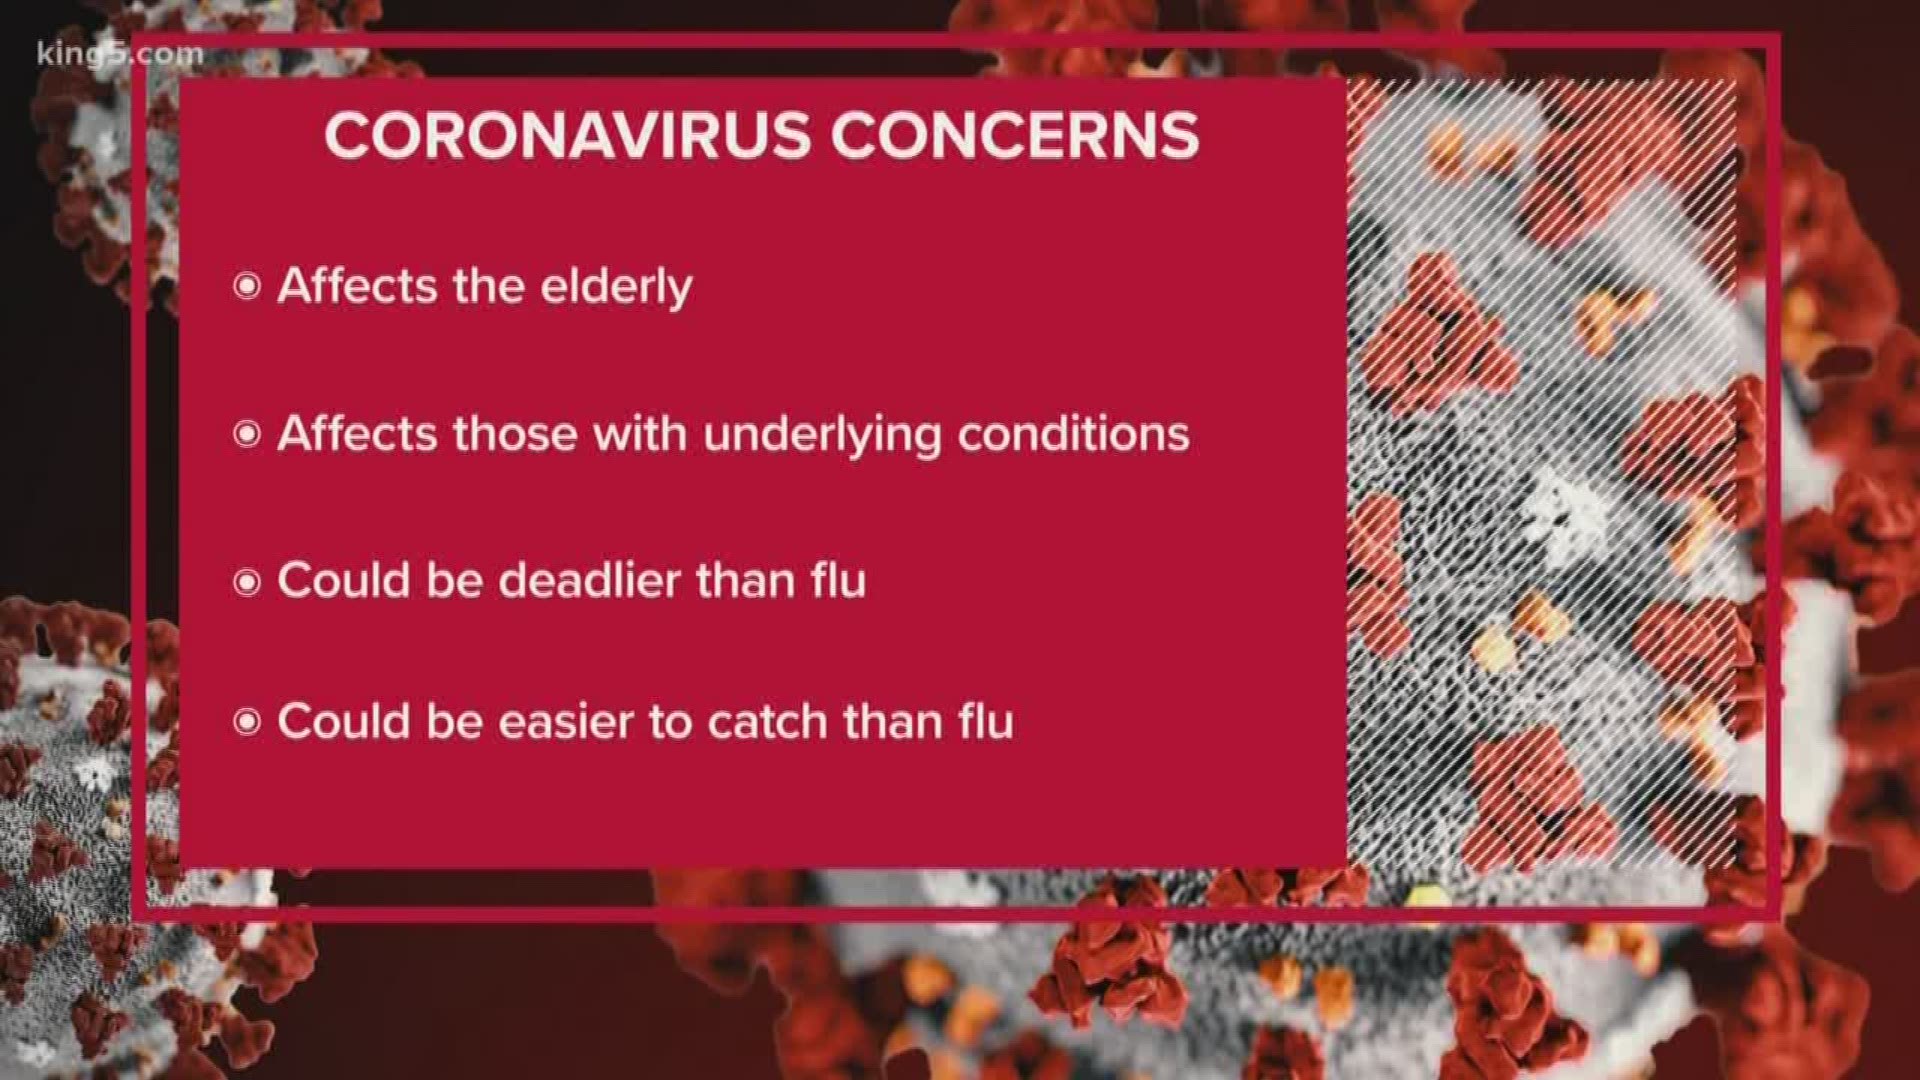 Two men have died from coronavirus in Washington state, the first U.S. deaths. Several schools in western Washington closed Monday out of an "abundance of caution."